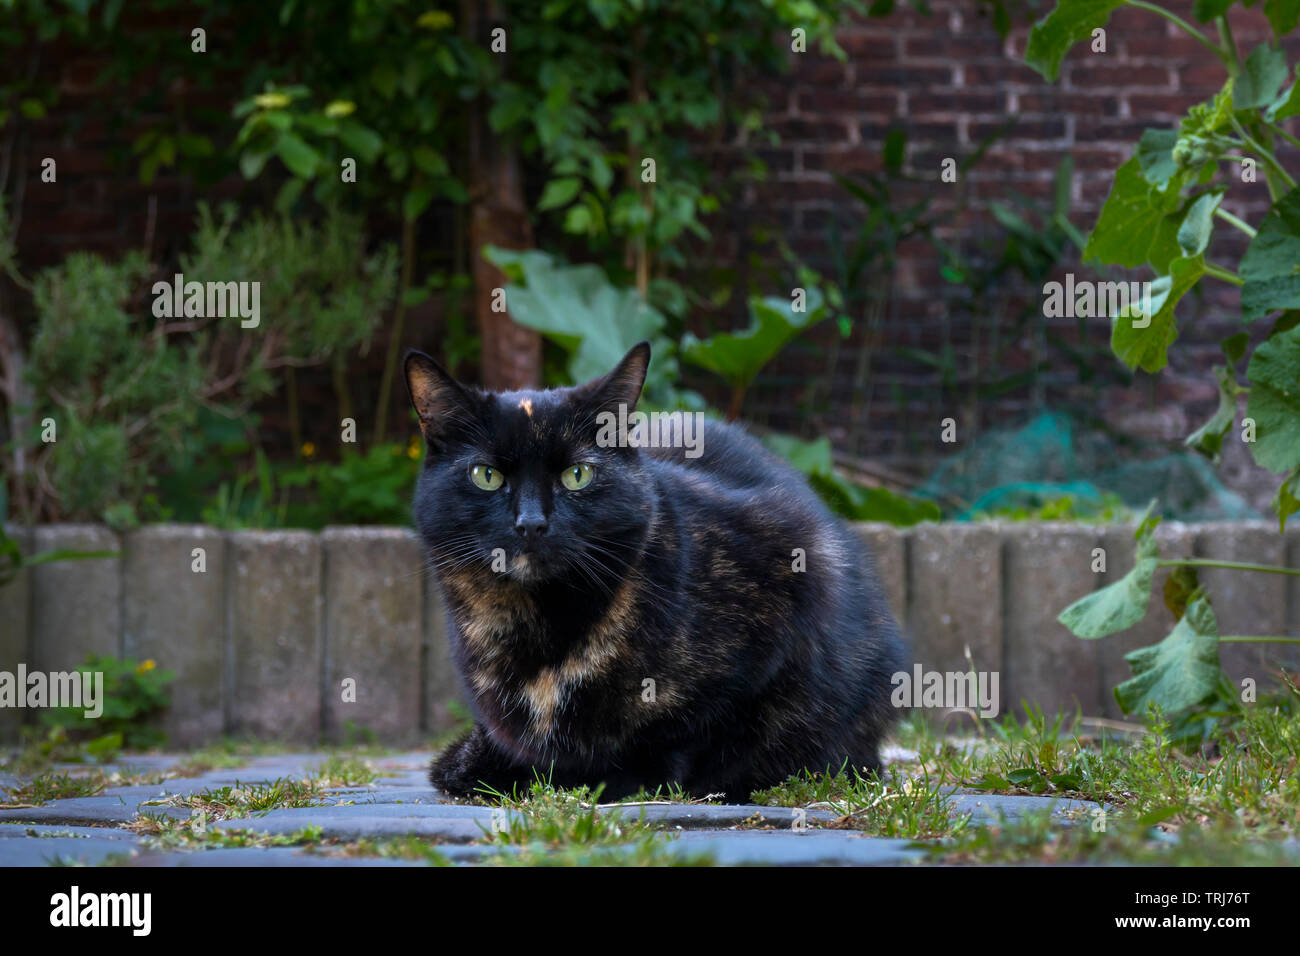 Calico cat with blue eyes sitting in the garden looking into camera Stock Photo